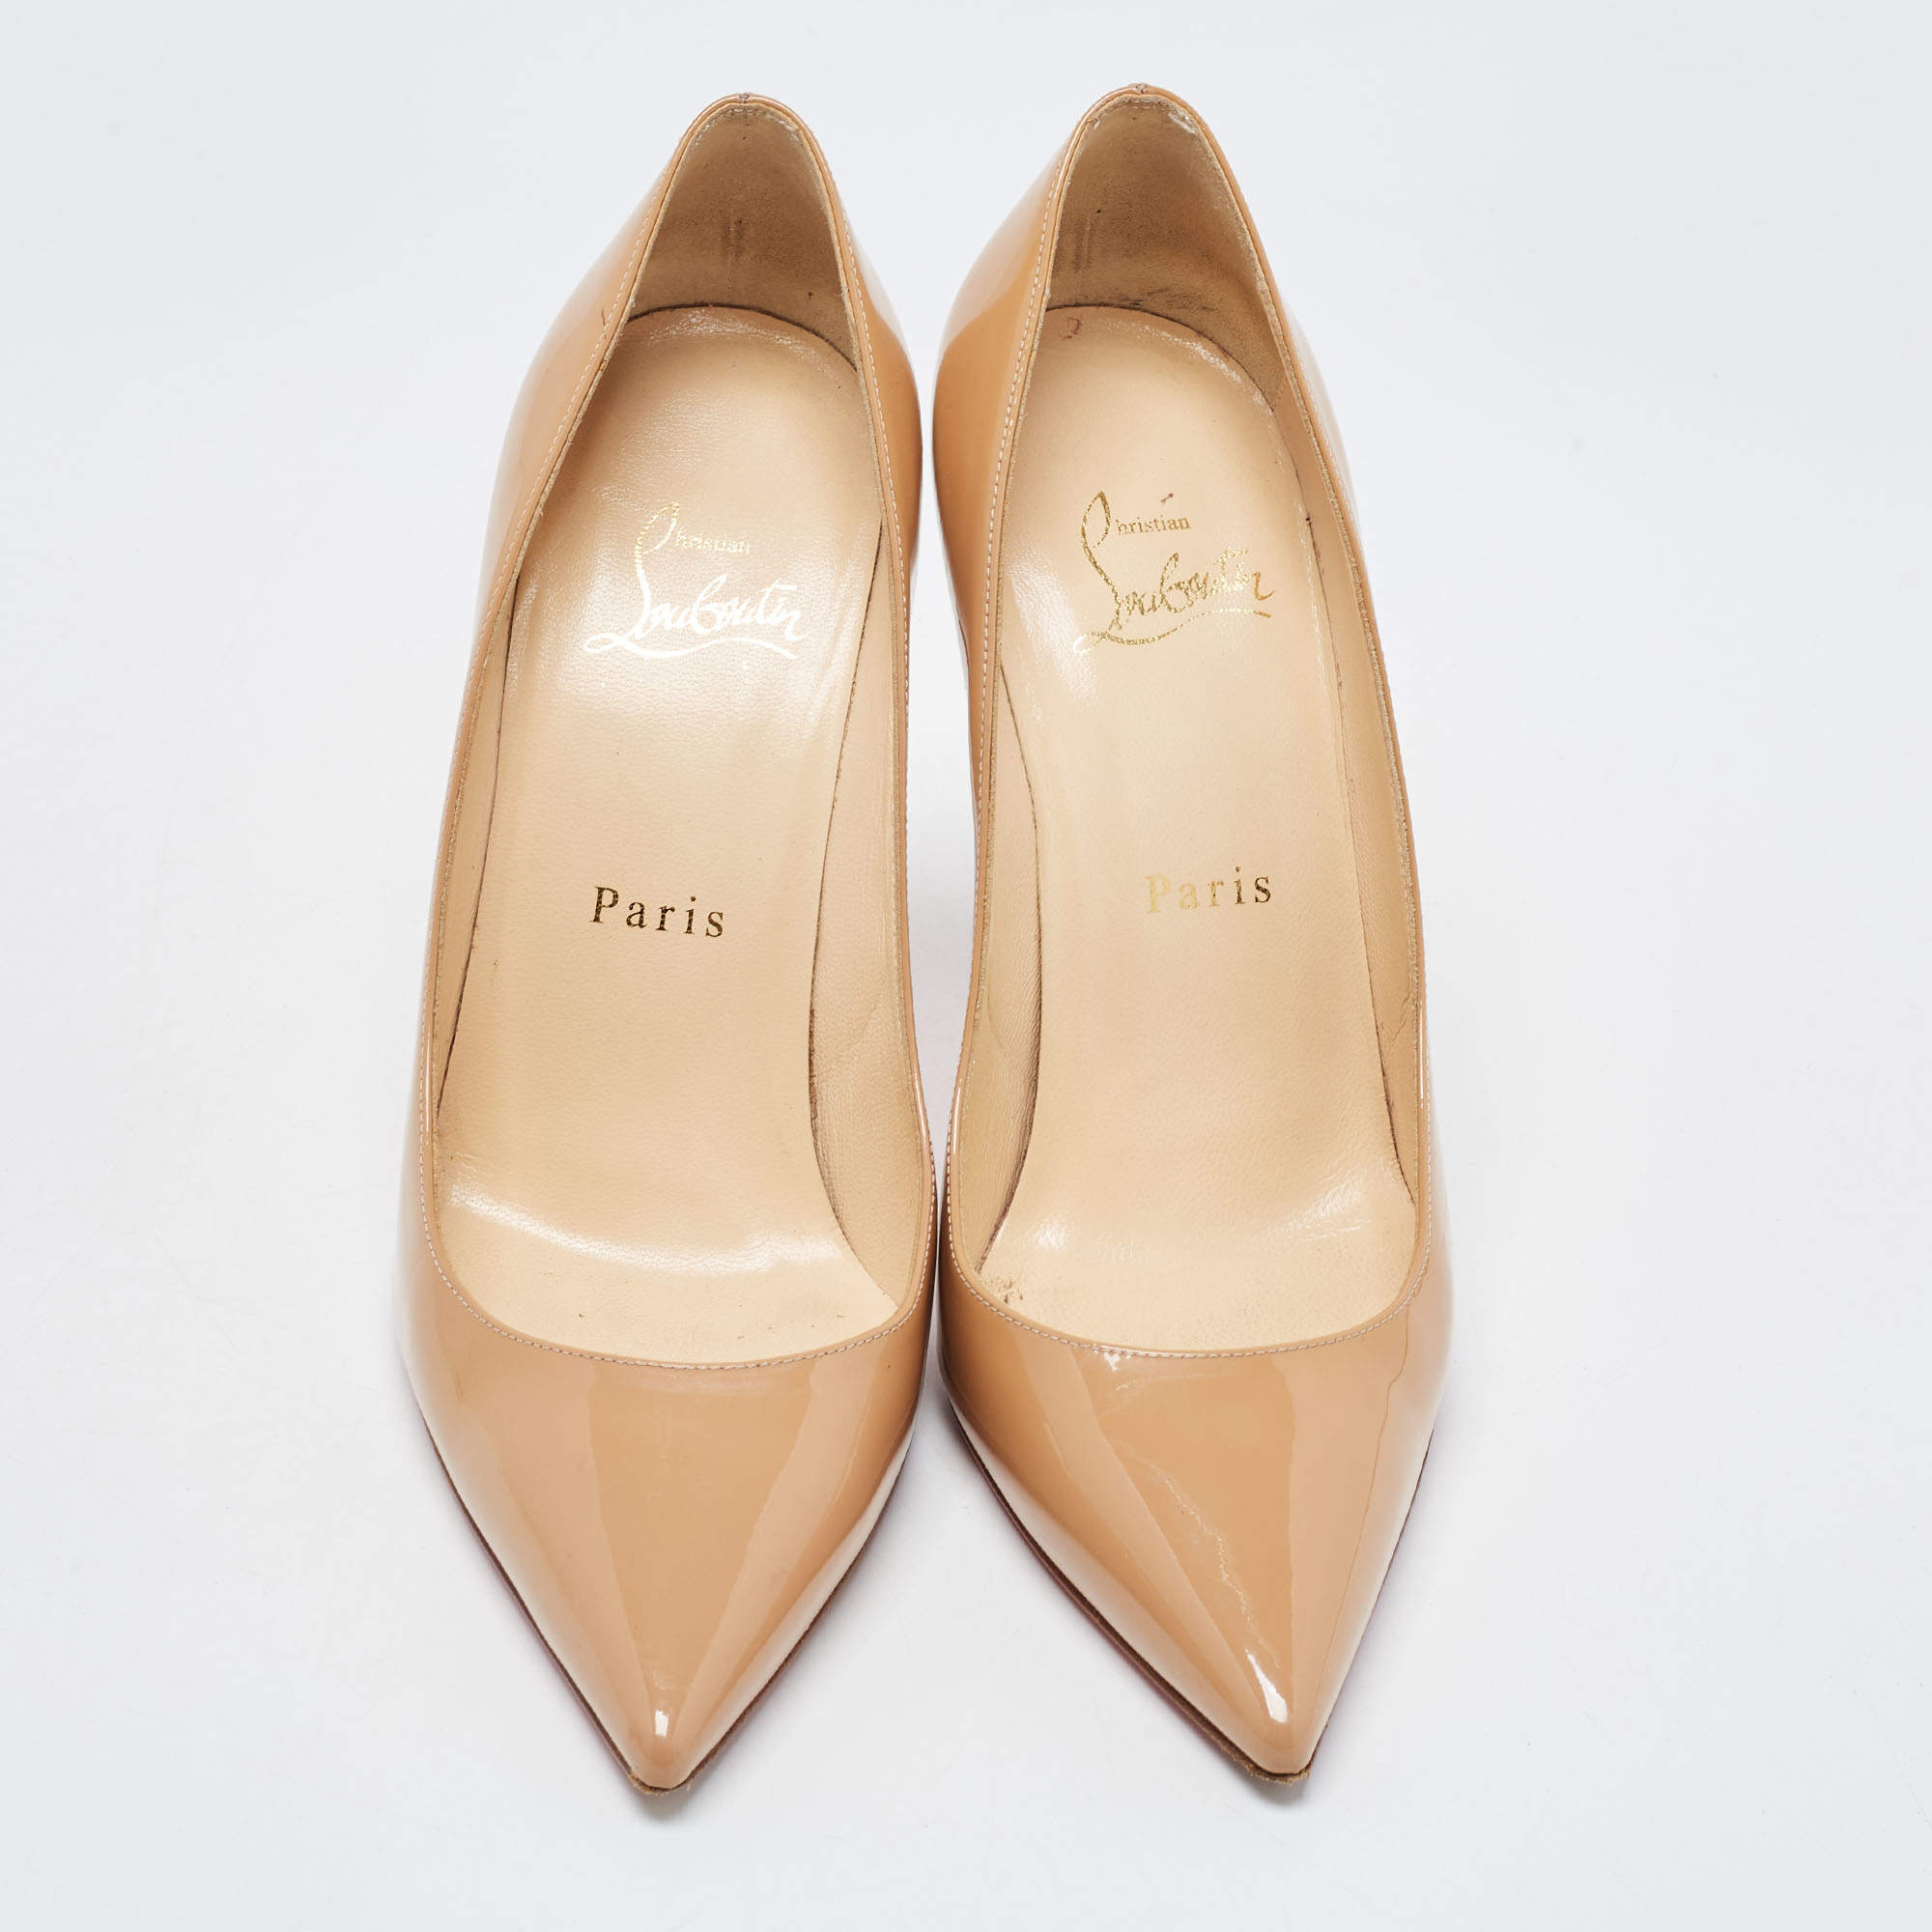 Patent leather heels Christian Louboutin Beige size 37 EU in Patent leather  - 25099420